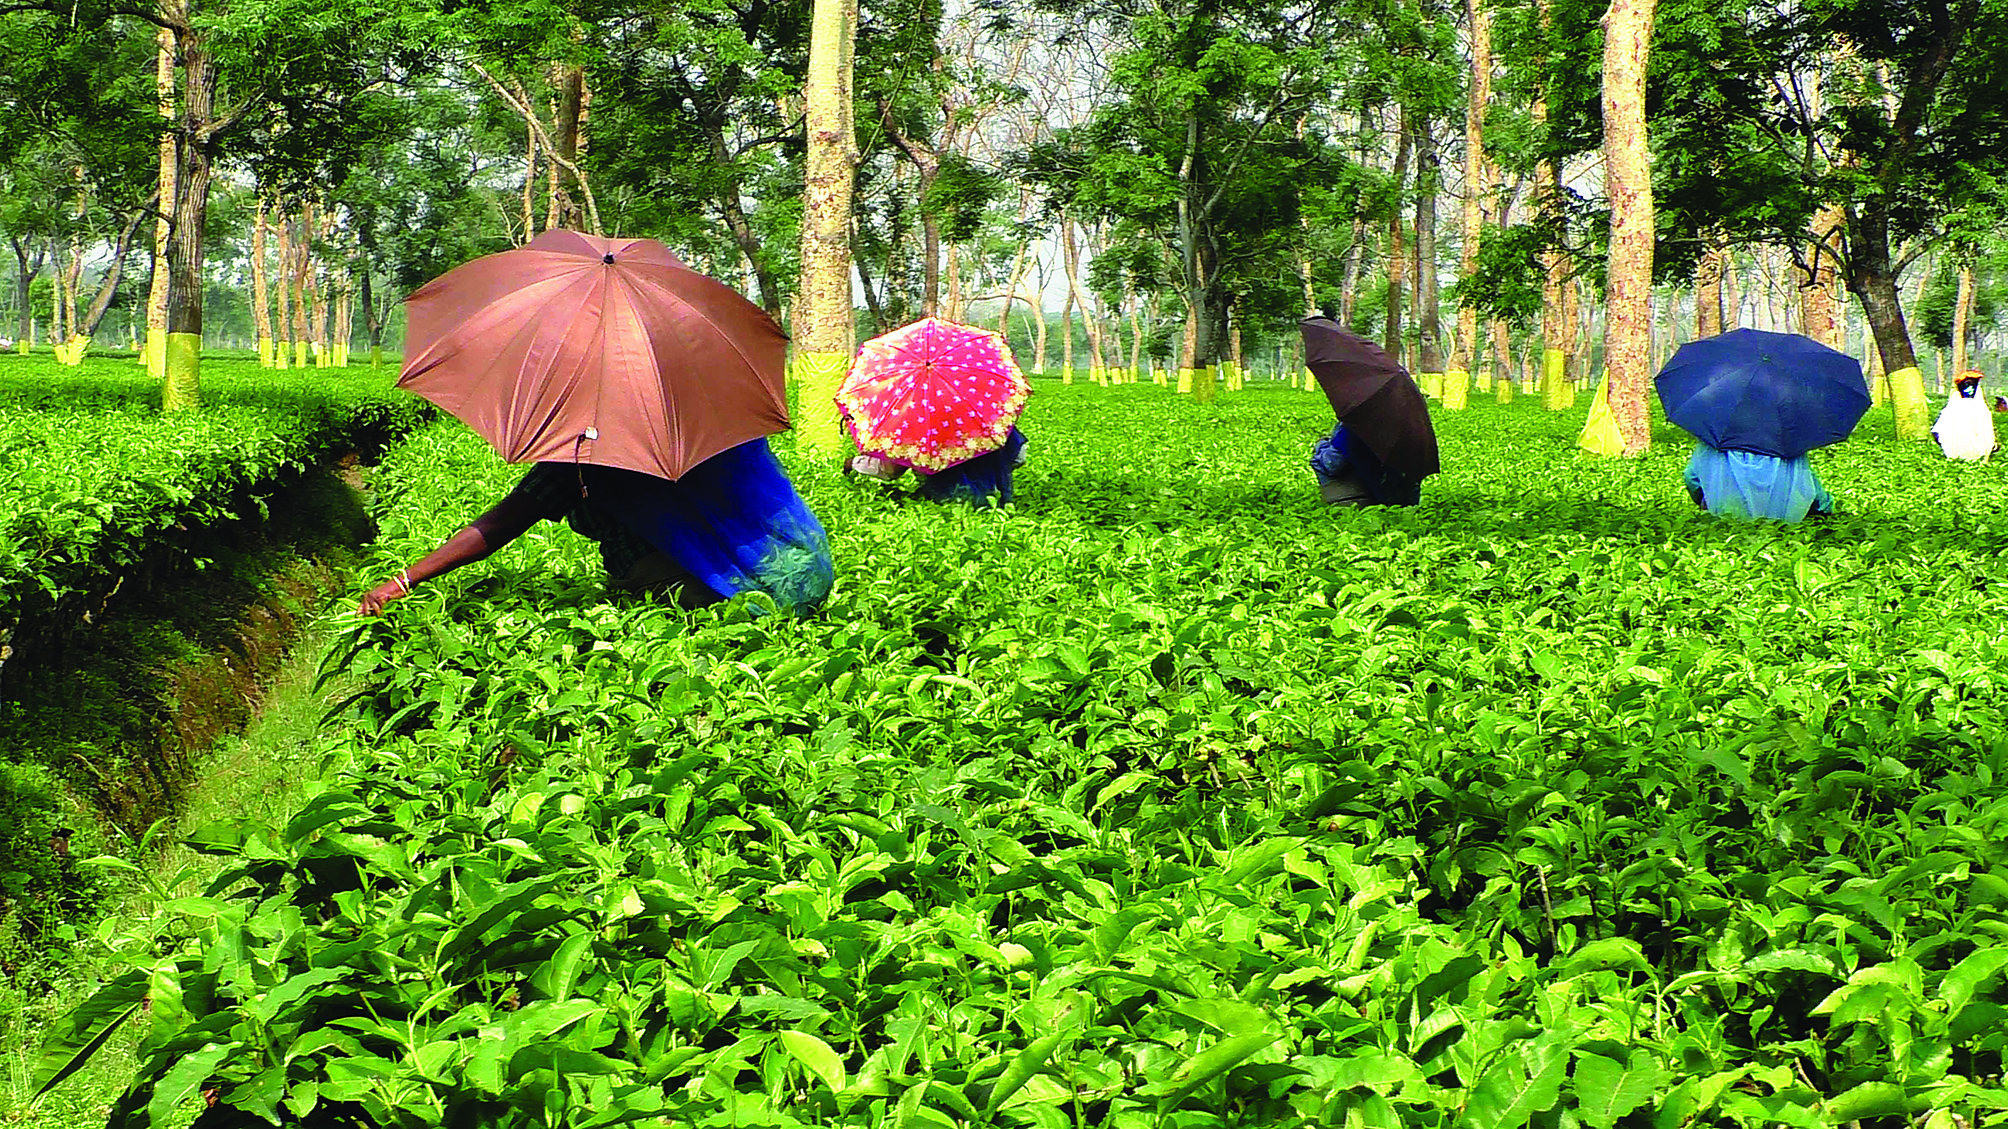 ‘Continuous plucking of tea leaves with both hands altered fingerprints of women workers’